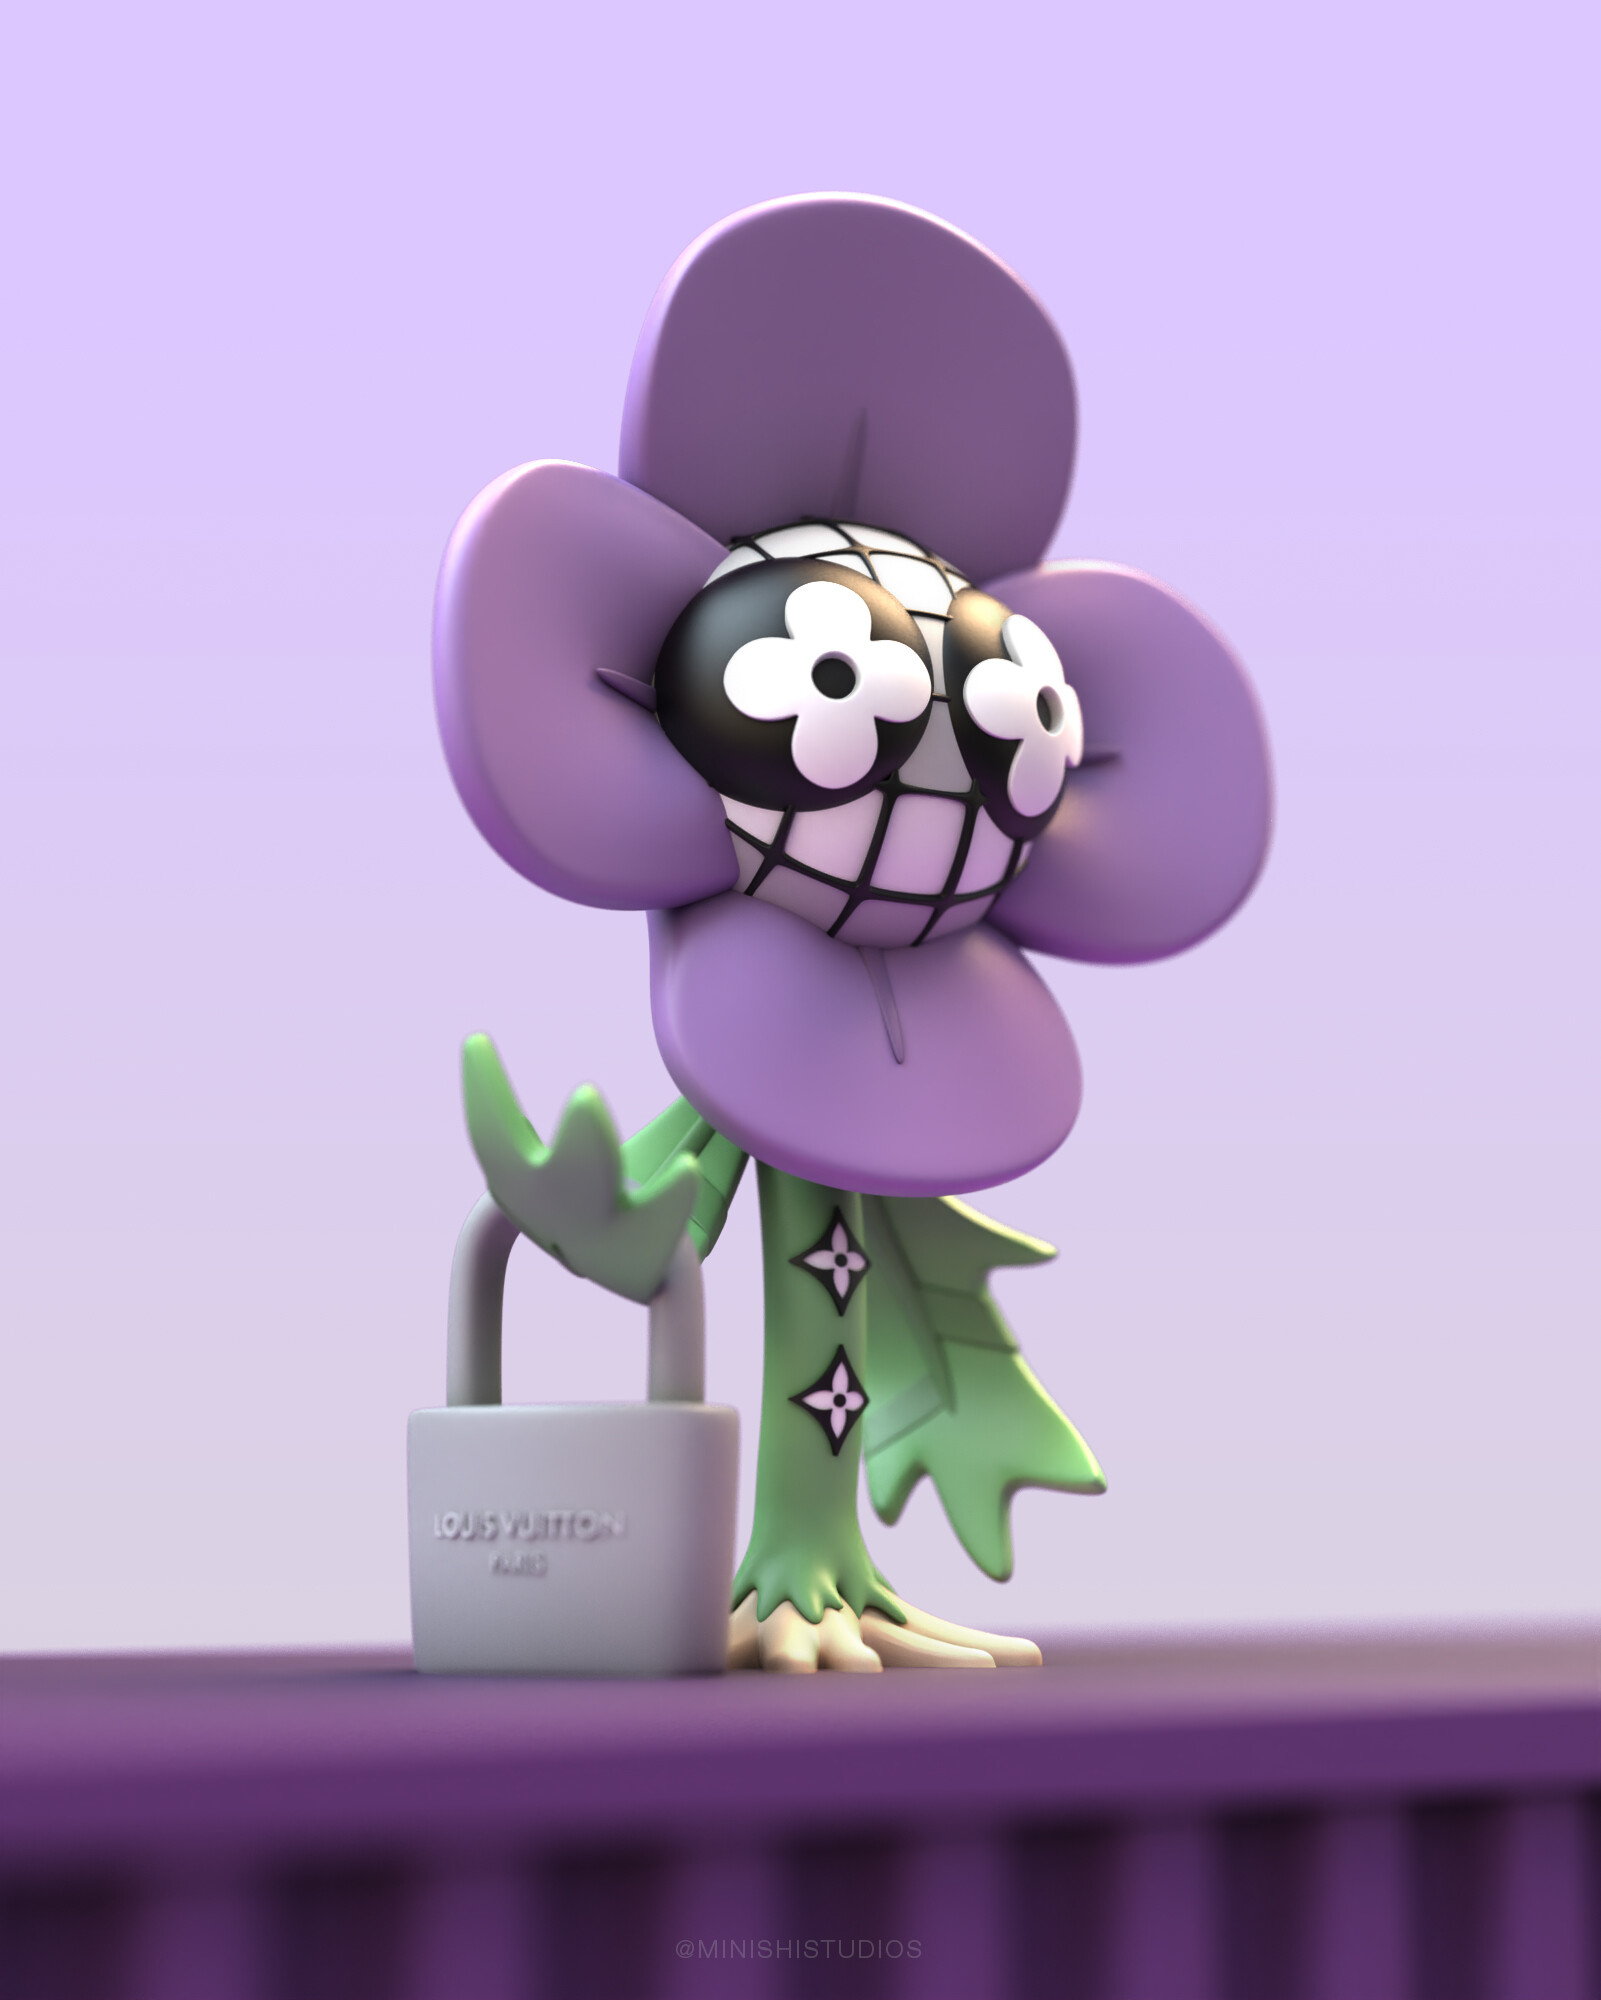 2/9. I made a 3D sculpt based on Virgil Abloh's Zoooom with Friends  characters for Louis Vuitton. I hope you like it! : r/alternativeart